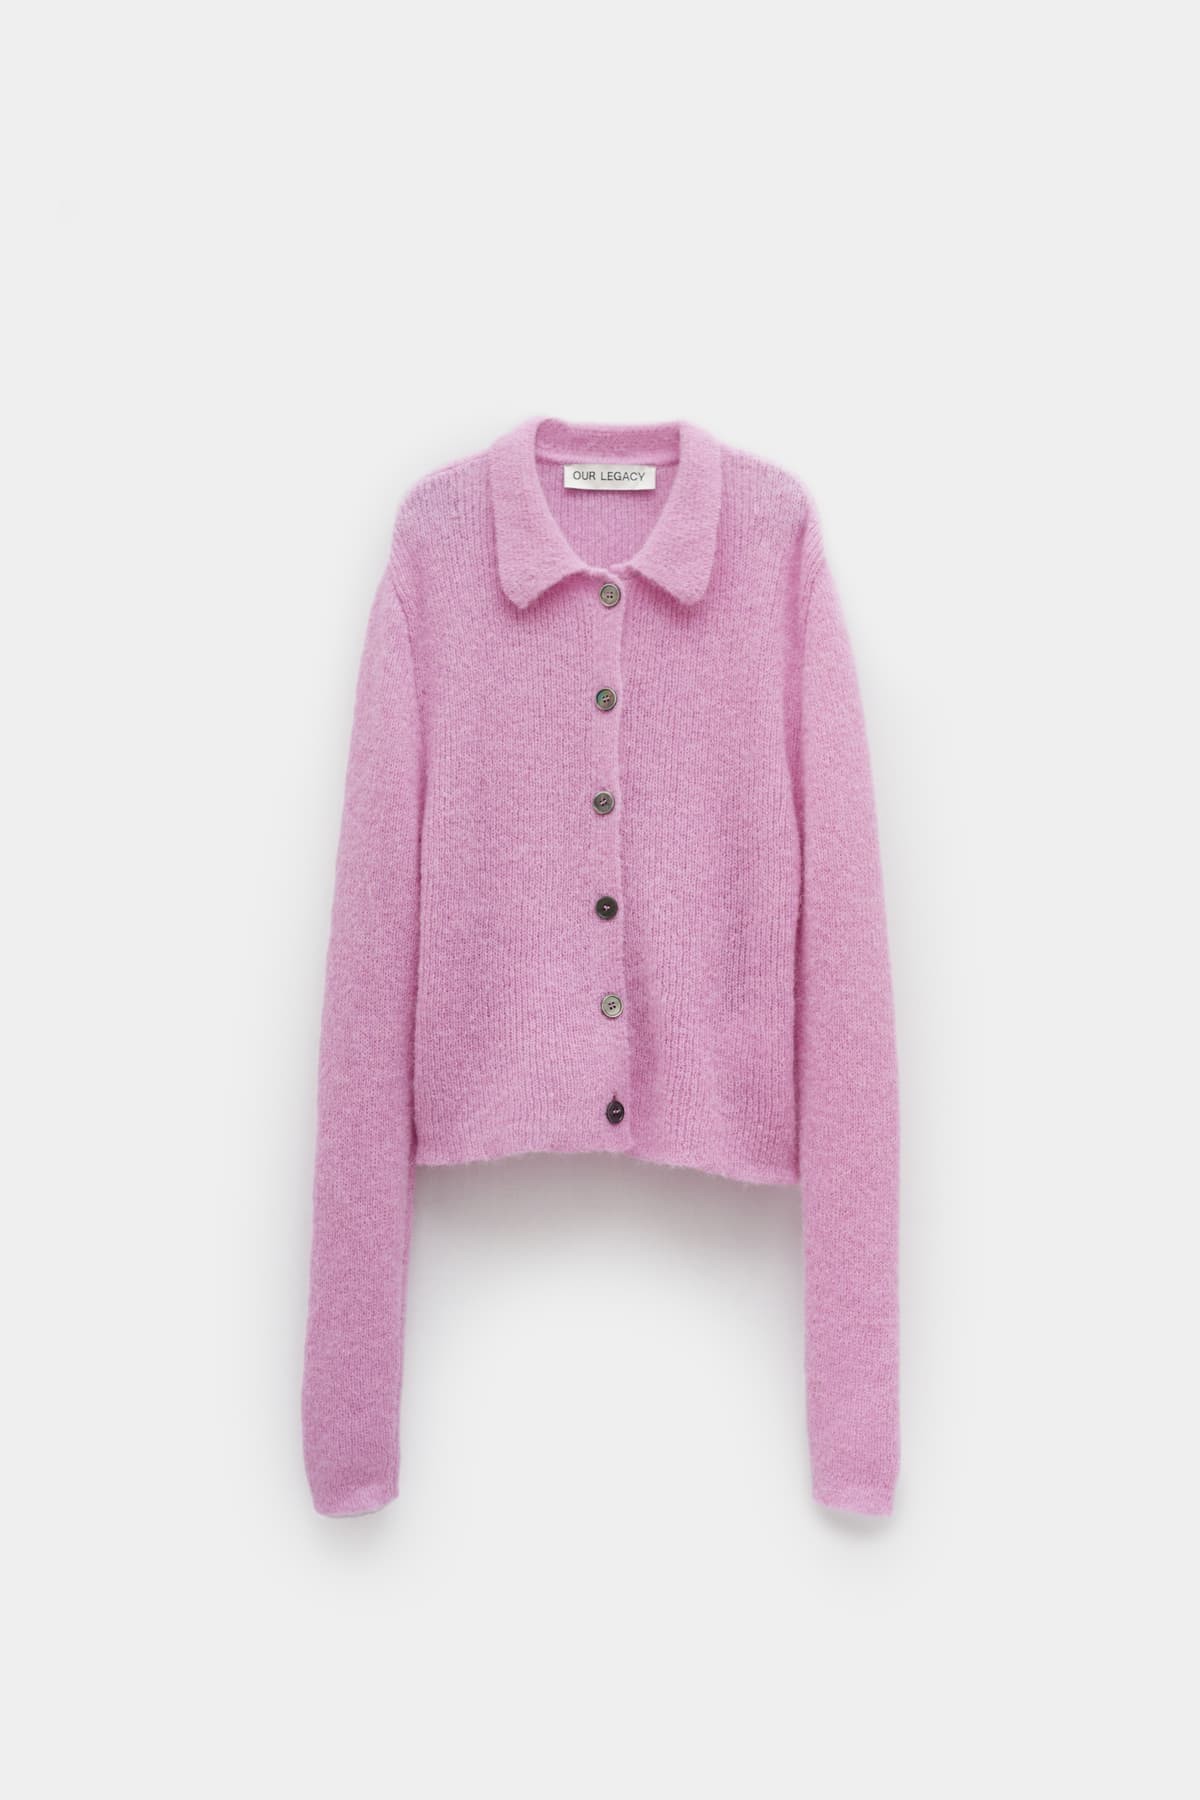 OUR LEGACY CANDYFLOSS MAZZY POLO CARDIGAN IAMNUE